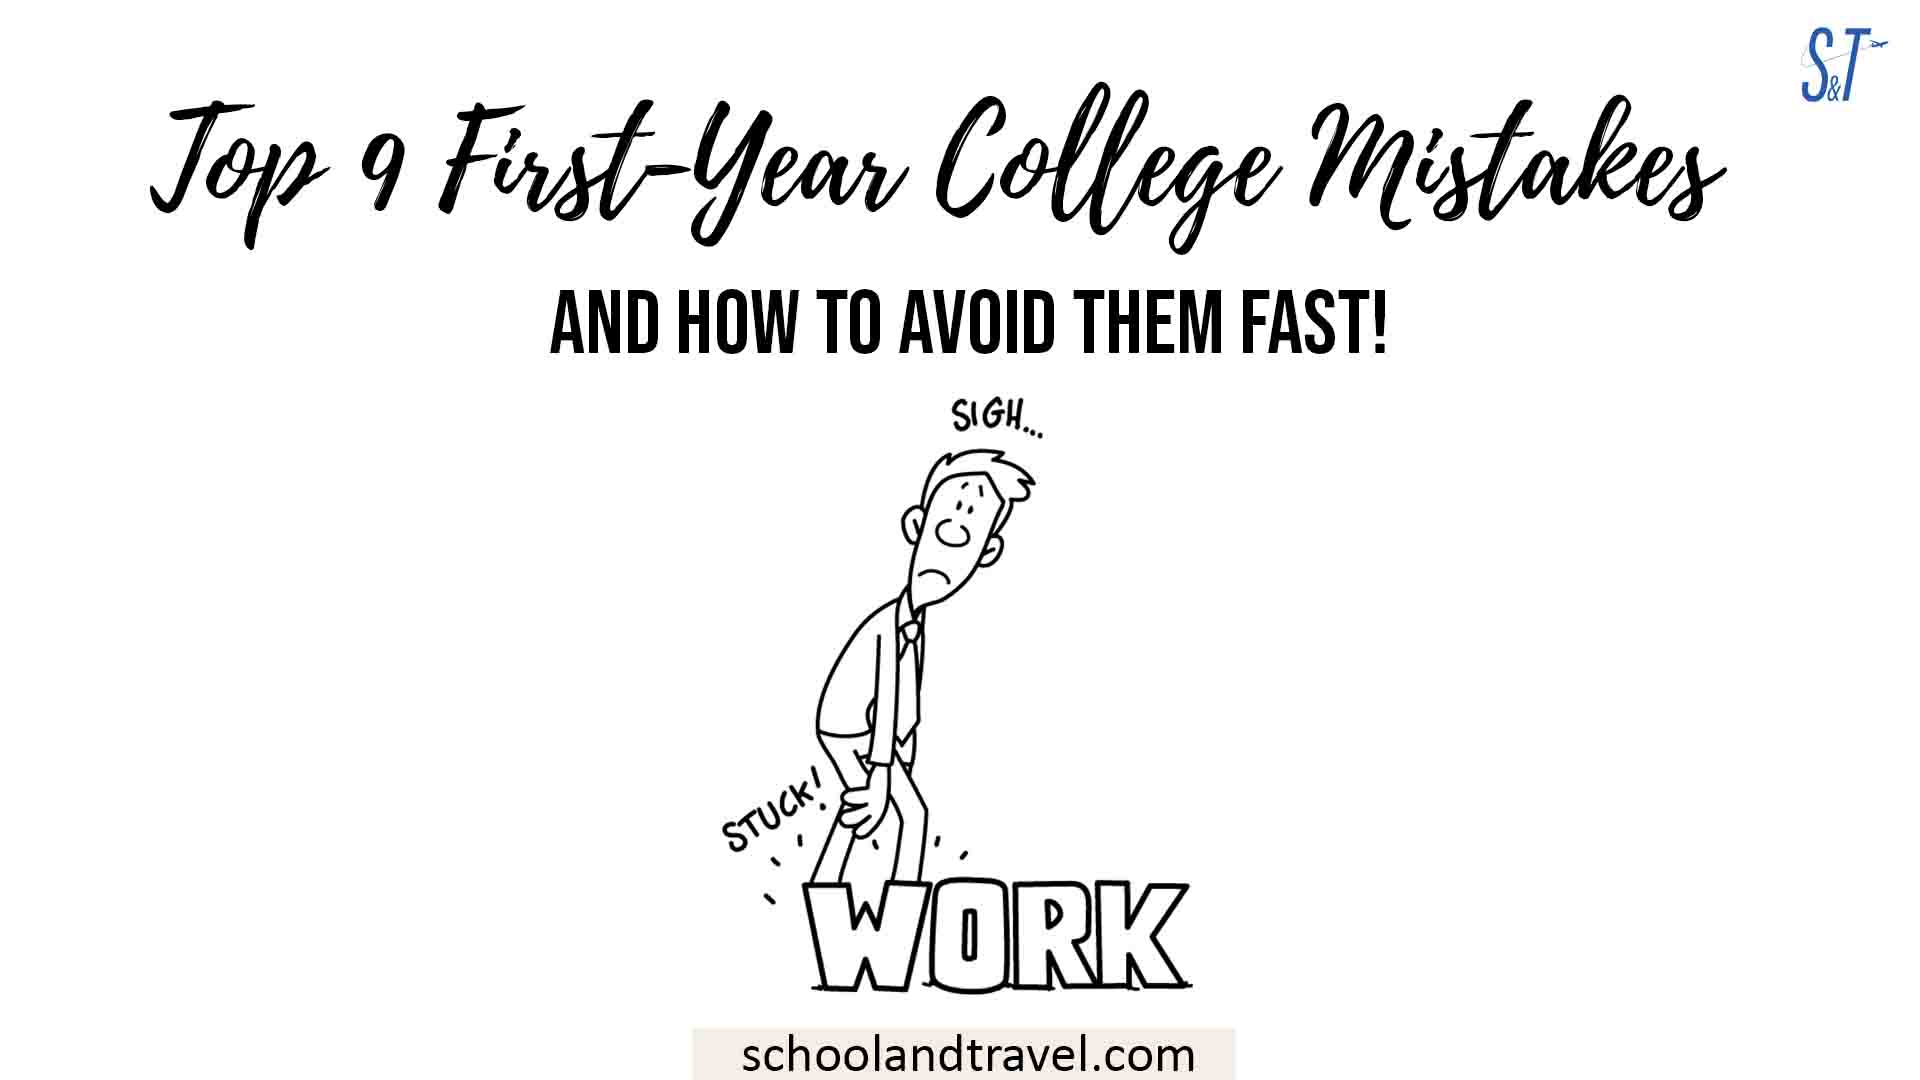 First-Year College Mistakes